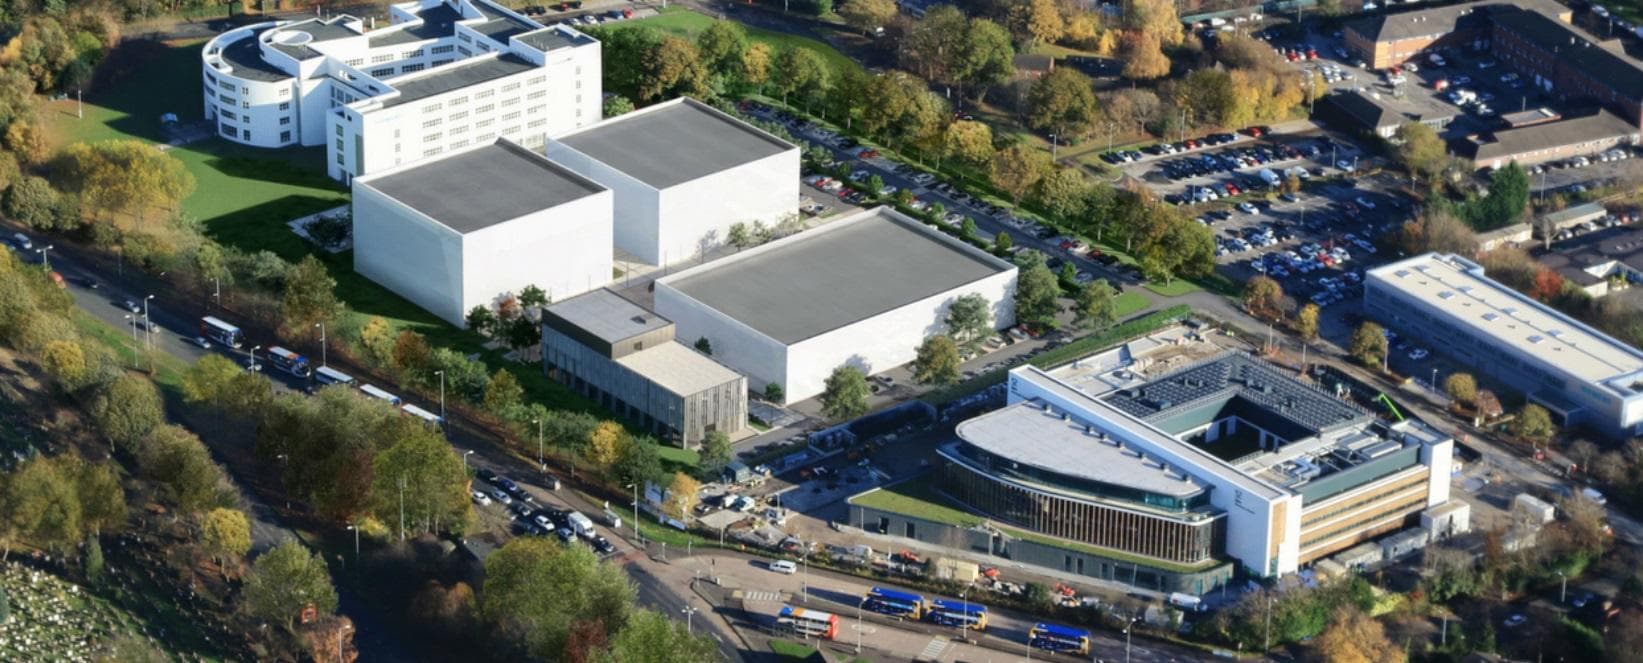 The first building to achieve net-zero carbon emission designed under the new UK Green Building Council definition is a new commercial office on Didsbury Technology Park.